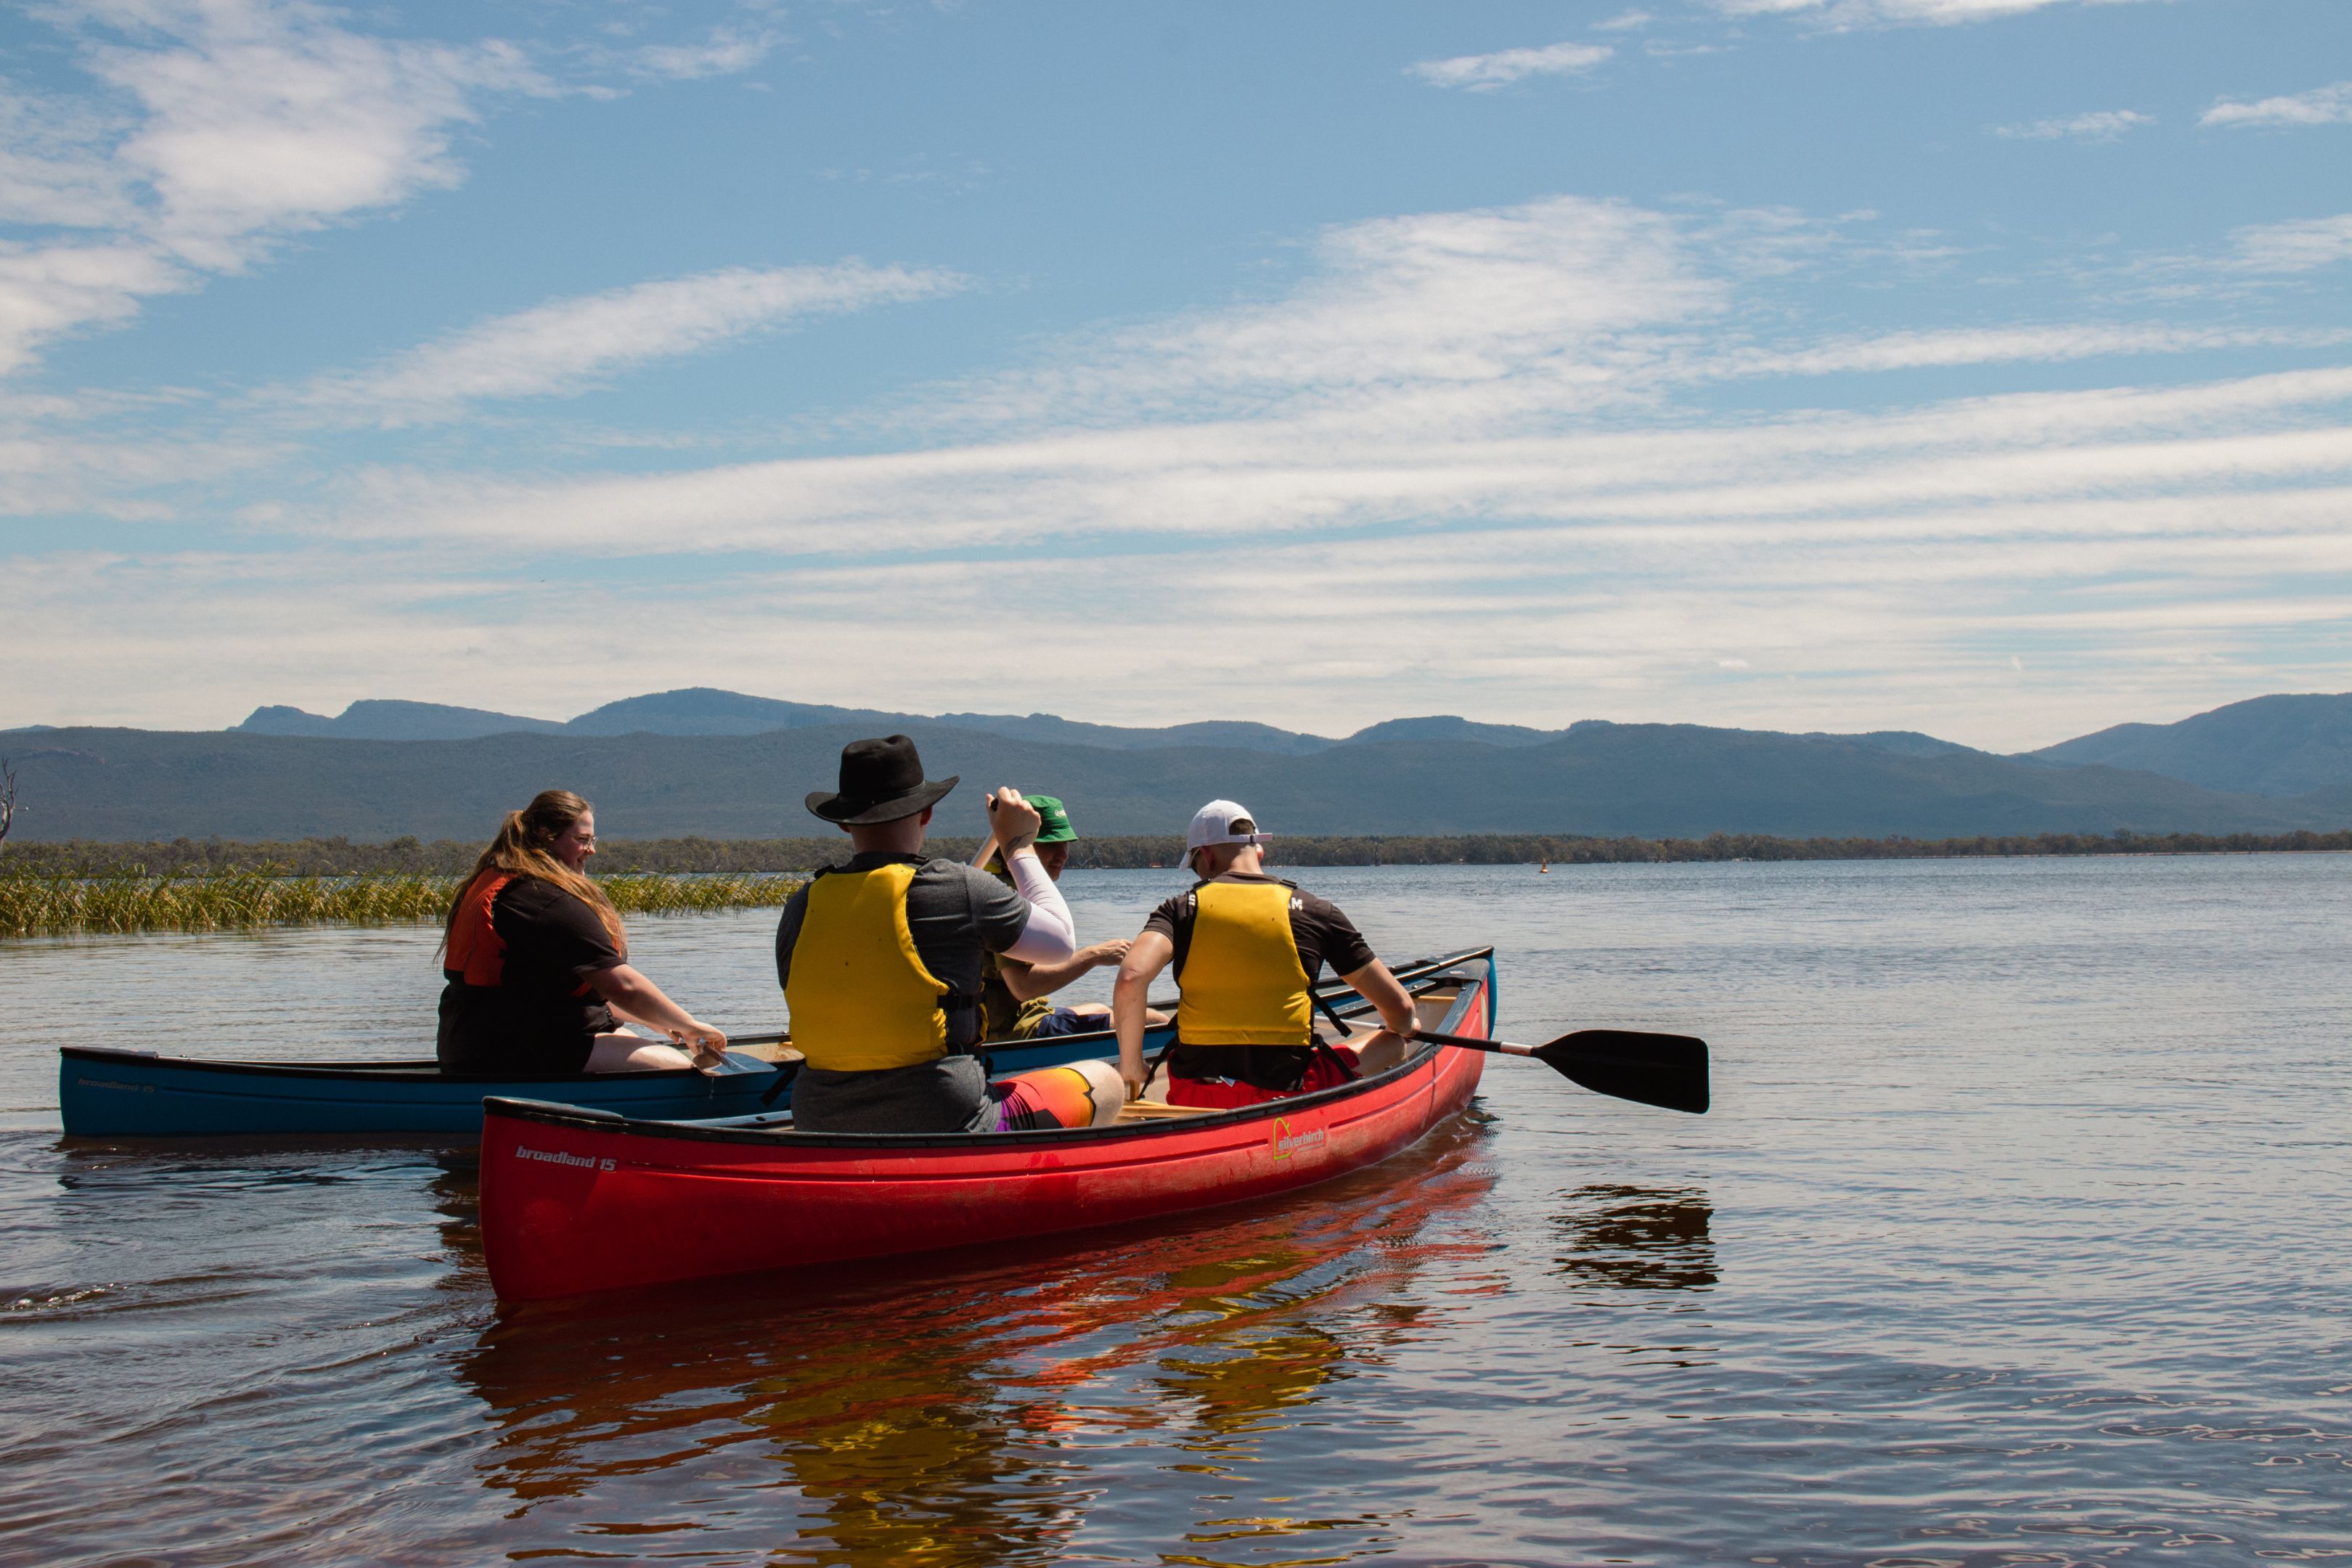 Participants of the MTC On-Country Development Program canoeing on a lake.